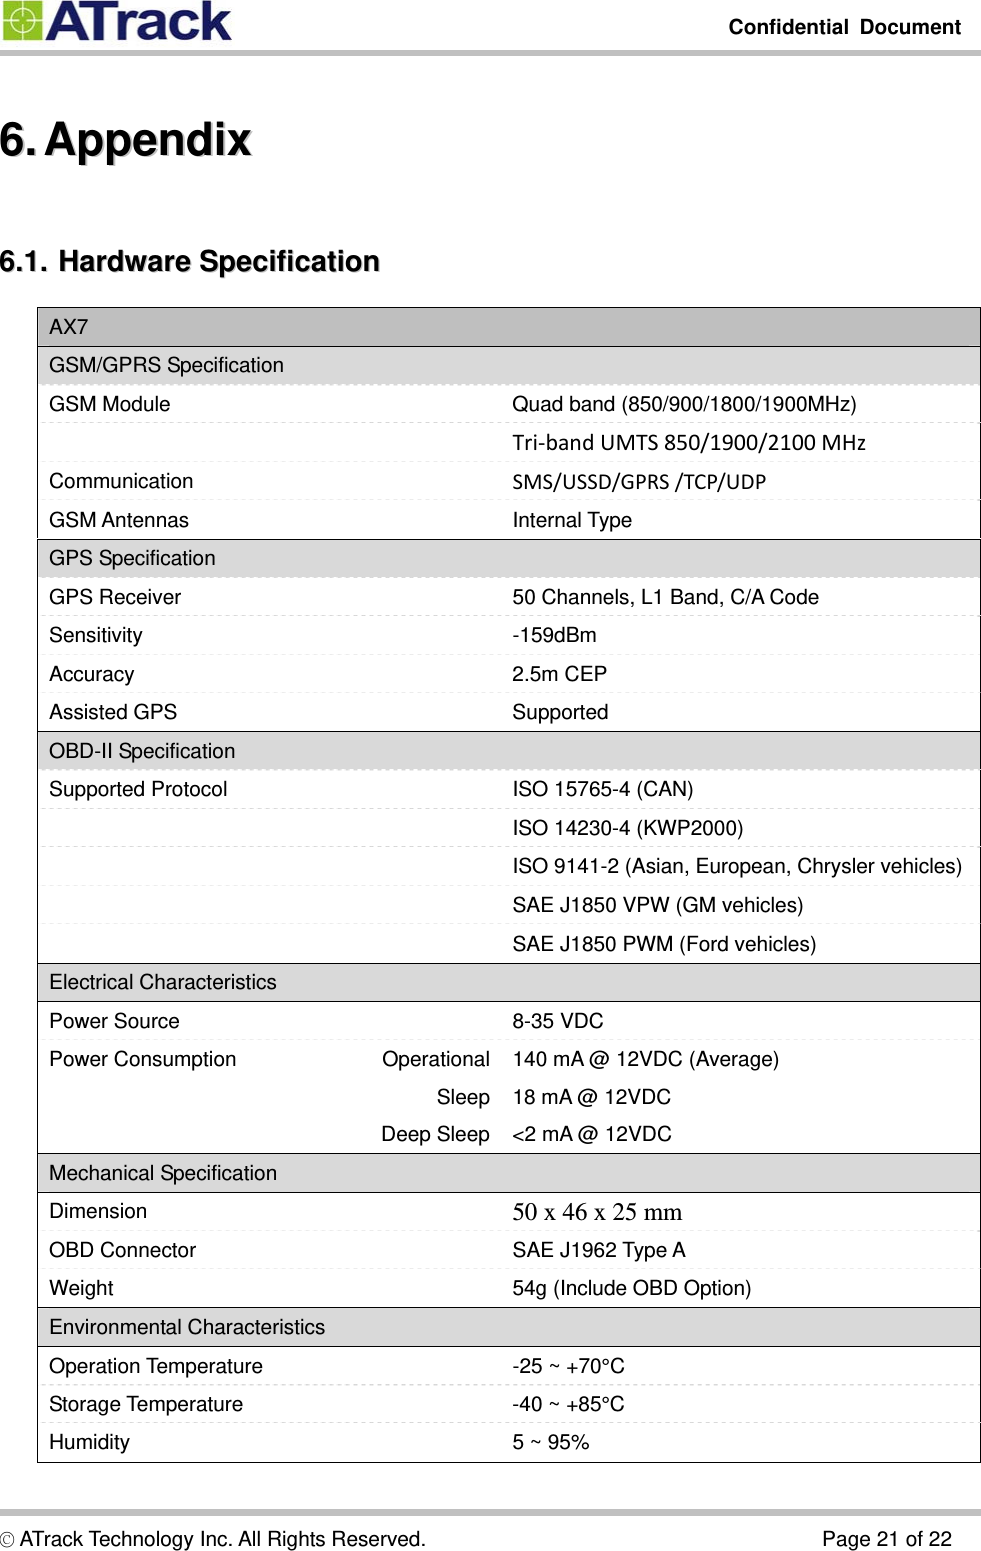         Confidential Document  © ATrack Technology Inc. All Rights Reserved.                                      Page 21 of 22 66..  AAppppeennddiixx  66..11..  HHaarrddwwaarree  SSppeecciiffiiccaattiioonn  AX7 GSM/GPRS Specification GSM Module  Quad band (850/900/1800/1900MHz)  Tri‐bandUMTS850/1900/2100MHz Communication  SMS/USSD/GPRS/TCP/UDP GSM Antennas  Internal Type GPS Specification GPS Receiver  50 Channels, L1 Band, C/A Code Sensitivity -159dBm Accuracy 2.5m CEP Assisted GPS  Supported OBD-II Specification Supported Protocol  ISO 15765-4 (CAN)  ISO 14230-4 (KWP2000)   ISO 9141-2 (Asian, European, Chrysler vehicles)  SAE J1850 VPW (GM vehicles)   SAE J1850 PWM (Ford vehicles) Electrical Characteristics Power Source  8-35 VDC Power Consumption  Operational 140 mA @ 12VDC (Average)   Sleep 18 mA @ 12VDC   Deep Sleep &lt;2 mA @ 12VDC Mechanical Specification Dimension   50 x 46 x 25 mm OBD Connector  SAE J1962 Type A Weight  54g (Include OBD Option) Environmental Characteristics Operation Temperature  -25 ~ +70°C Storage Temperature  -40 ~ +85°C Humidity  5 ~ 95%  